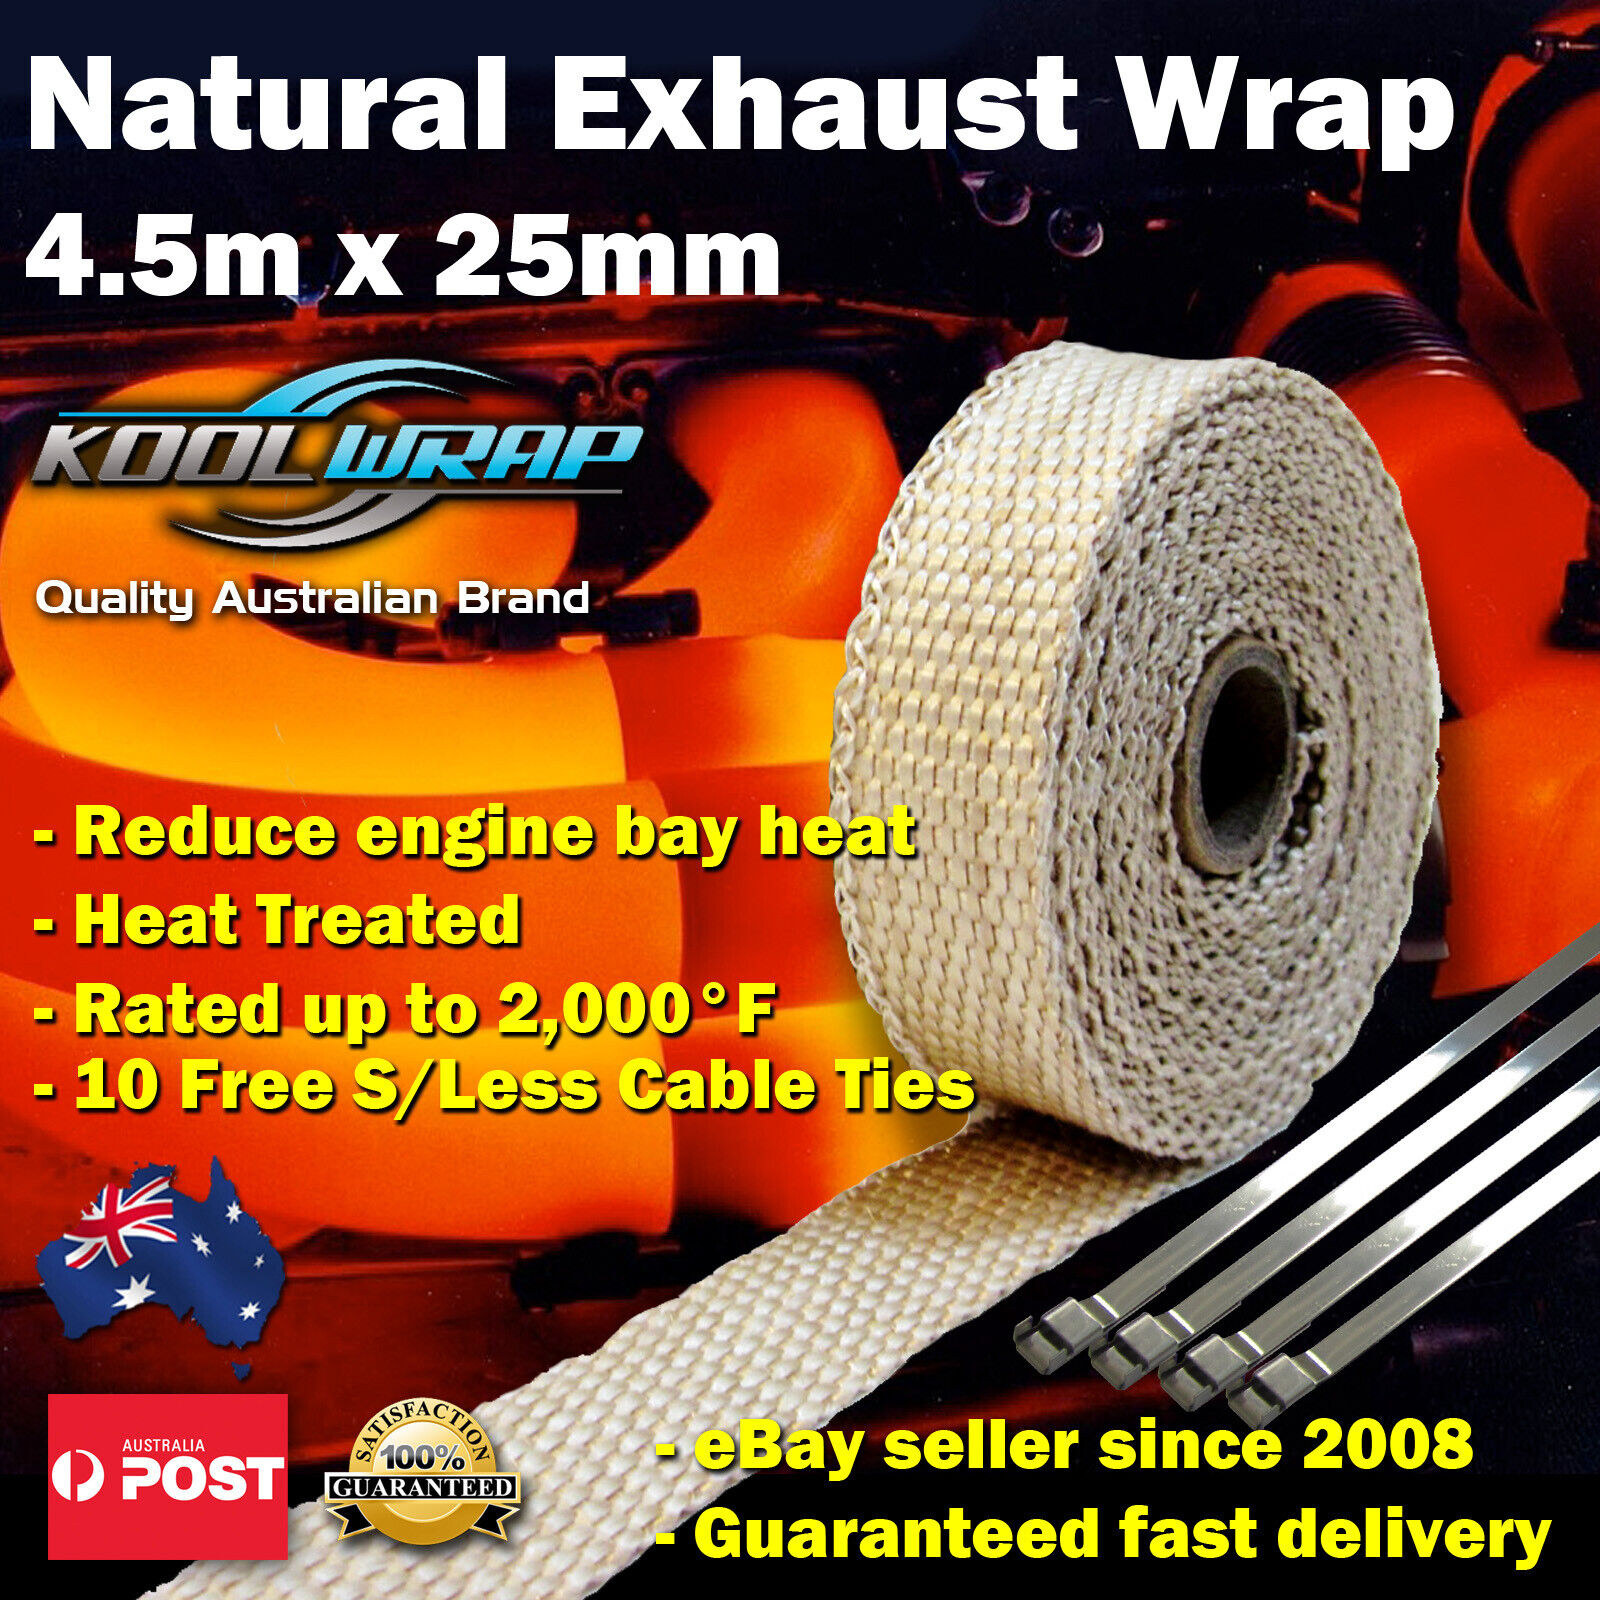 EXHAUST WRAP HEADER TAPE F Heat Protection 2000°F Tan 4.5m X 25m 4 S/less Ties